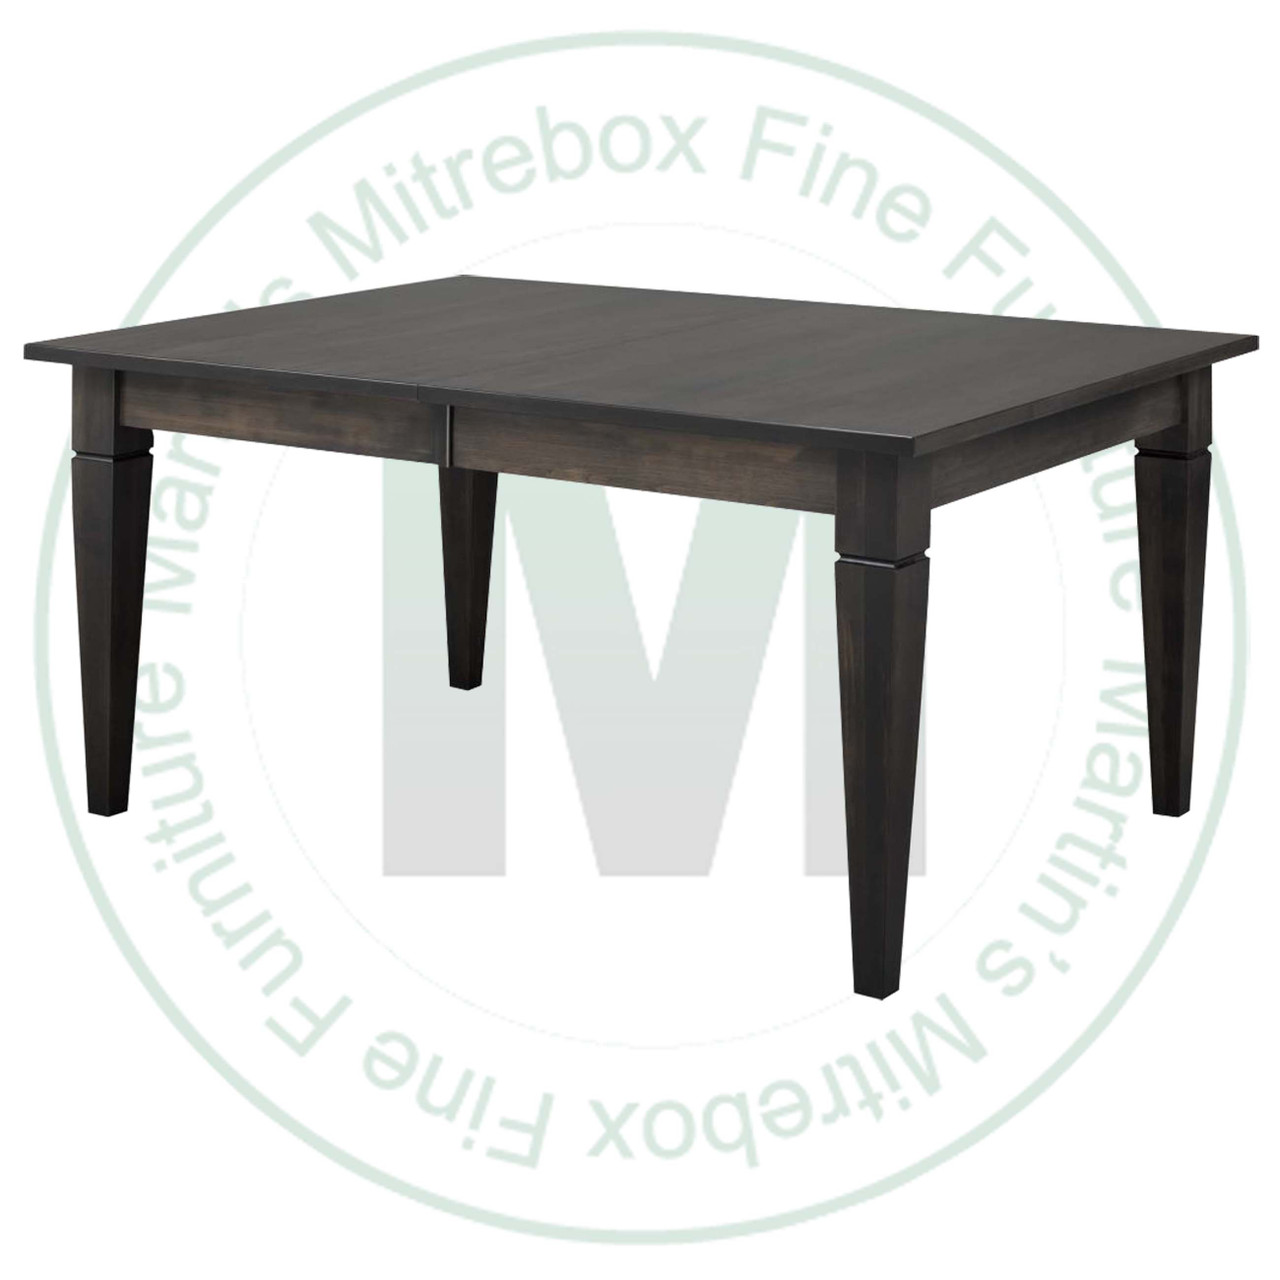 Wormy Maple Reesor Solid Top Harvest Table 48''D x 72''W x 30''H Table Has 1.25'' Thick Top And 2 - 16'' Extensions